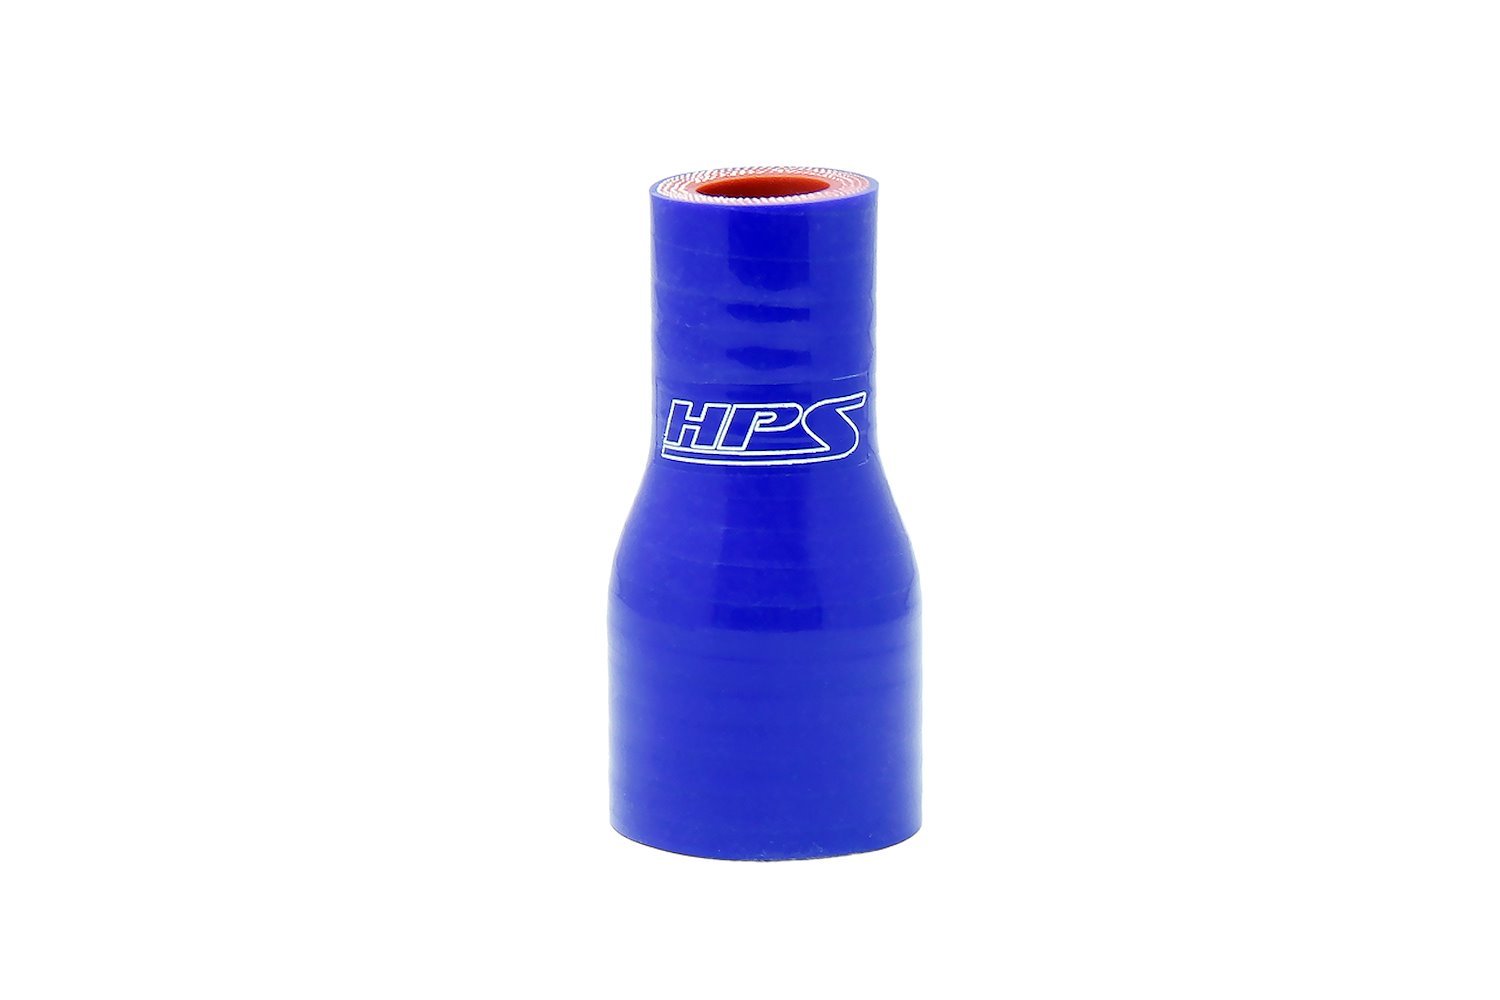 HTSR-087-125-BLUE Silicone Reducer Hose, High-Temp 4-Ply Reinforced, 7/8 in. - 1-1/4 in. ID, 3 in. Long, Blue